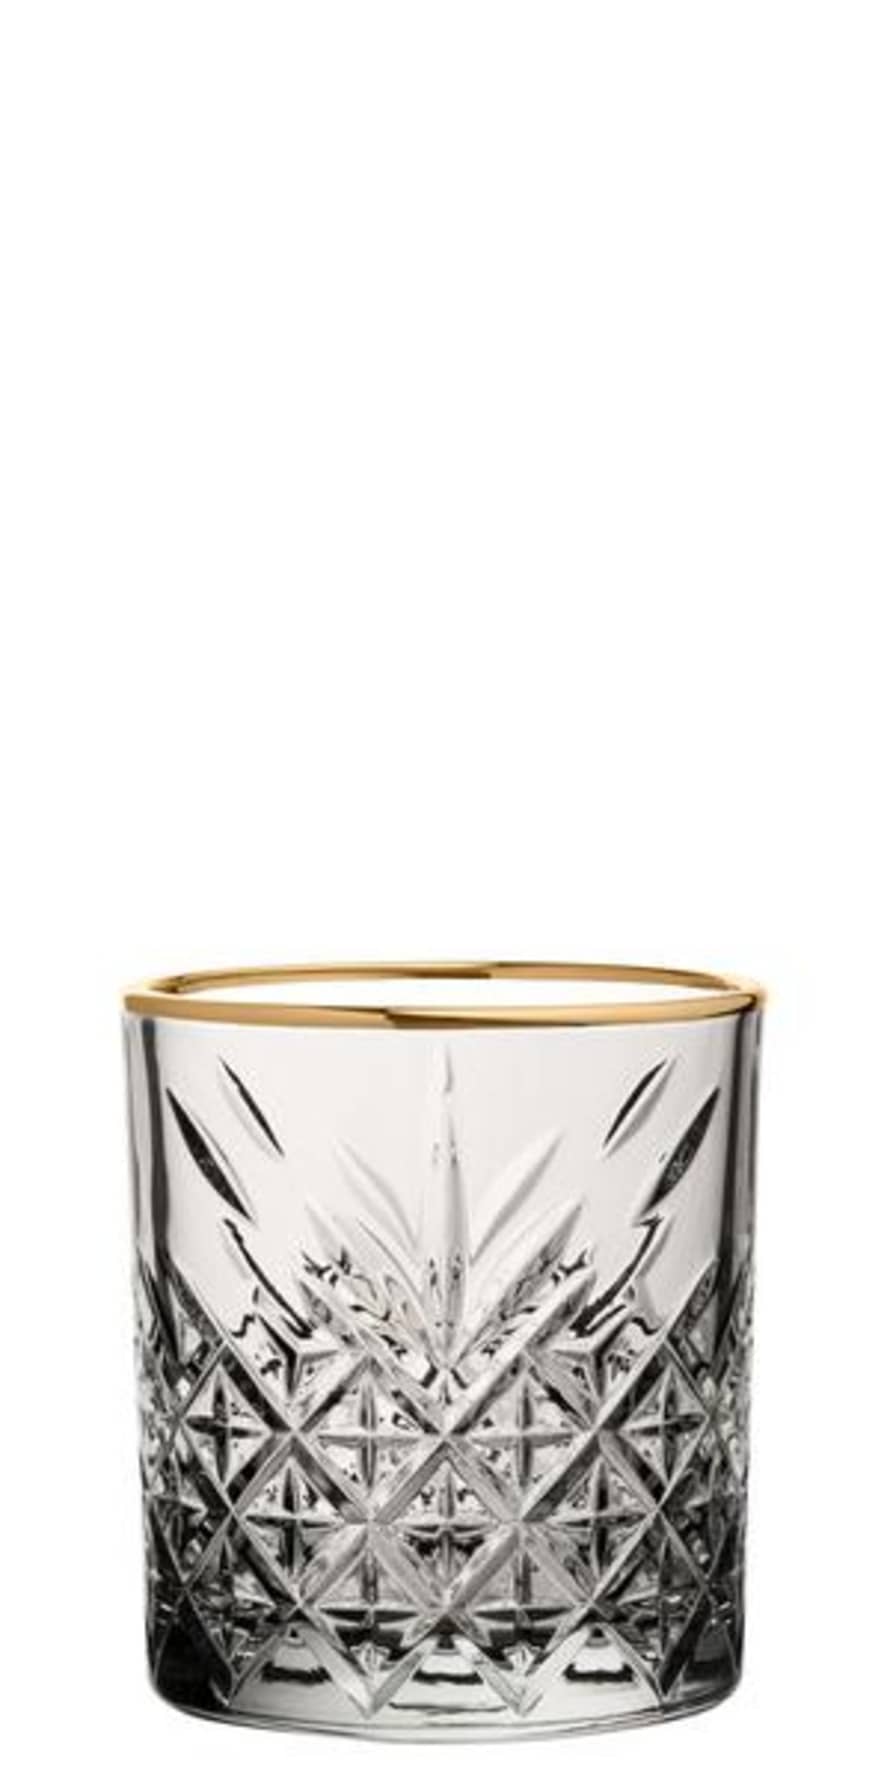 The Forest & Co. Classic Cut Glass Gold Rimmed Tumbler